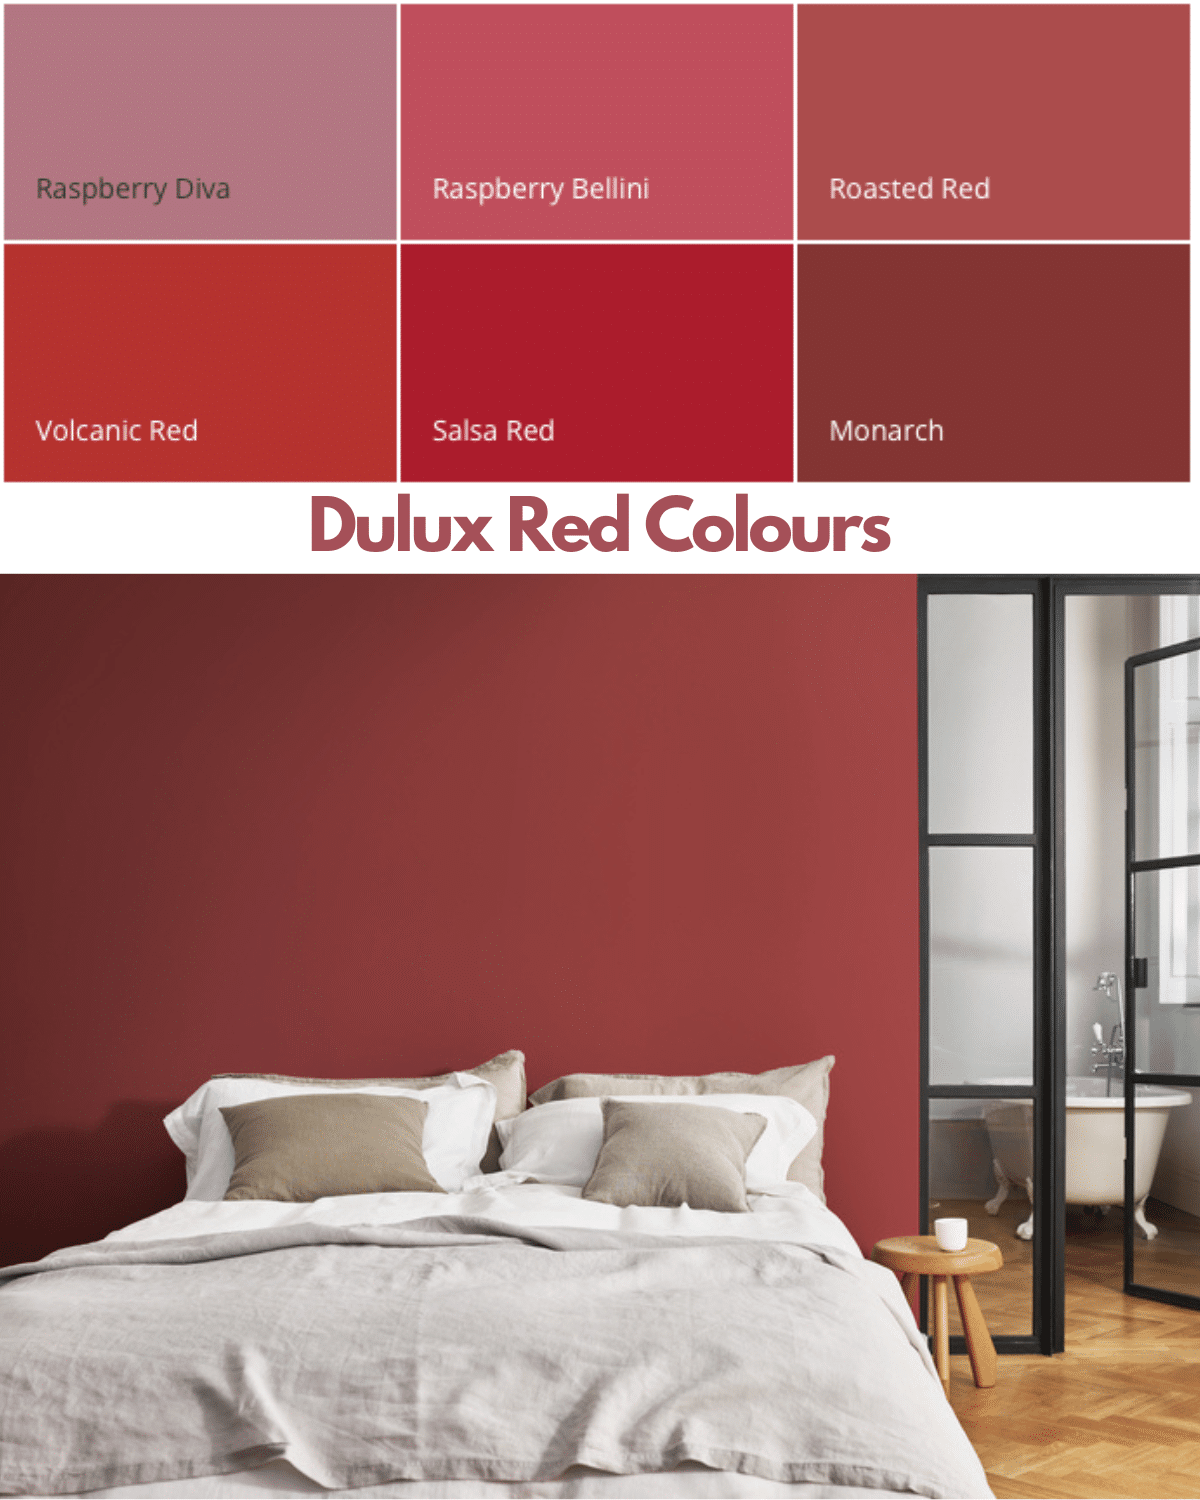 Dulux Red Colour Chart: The Dulux Red Colours - Sleek-chic Interiors